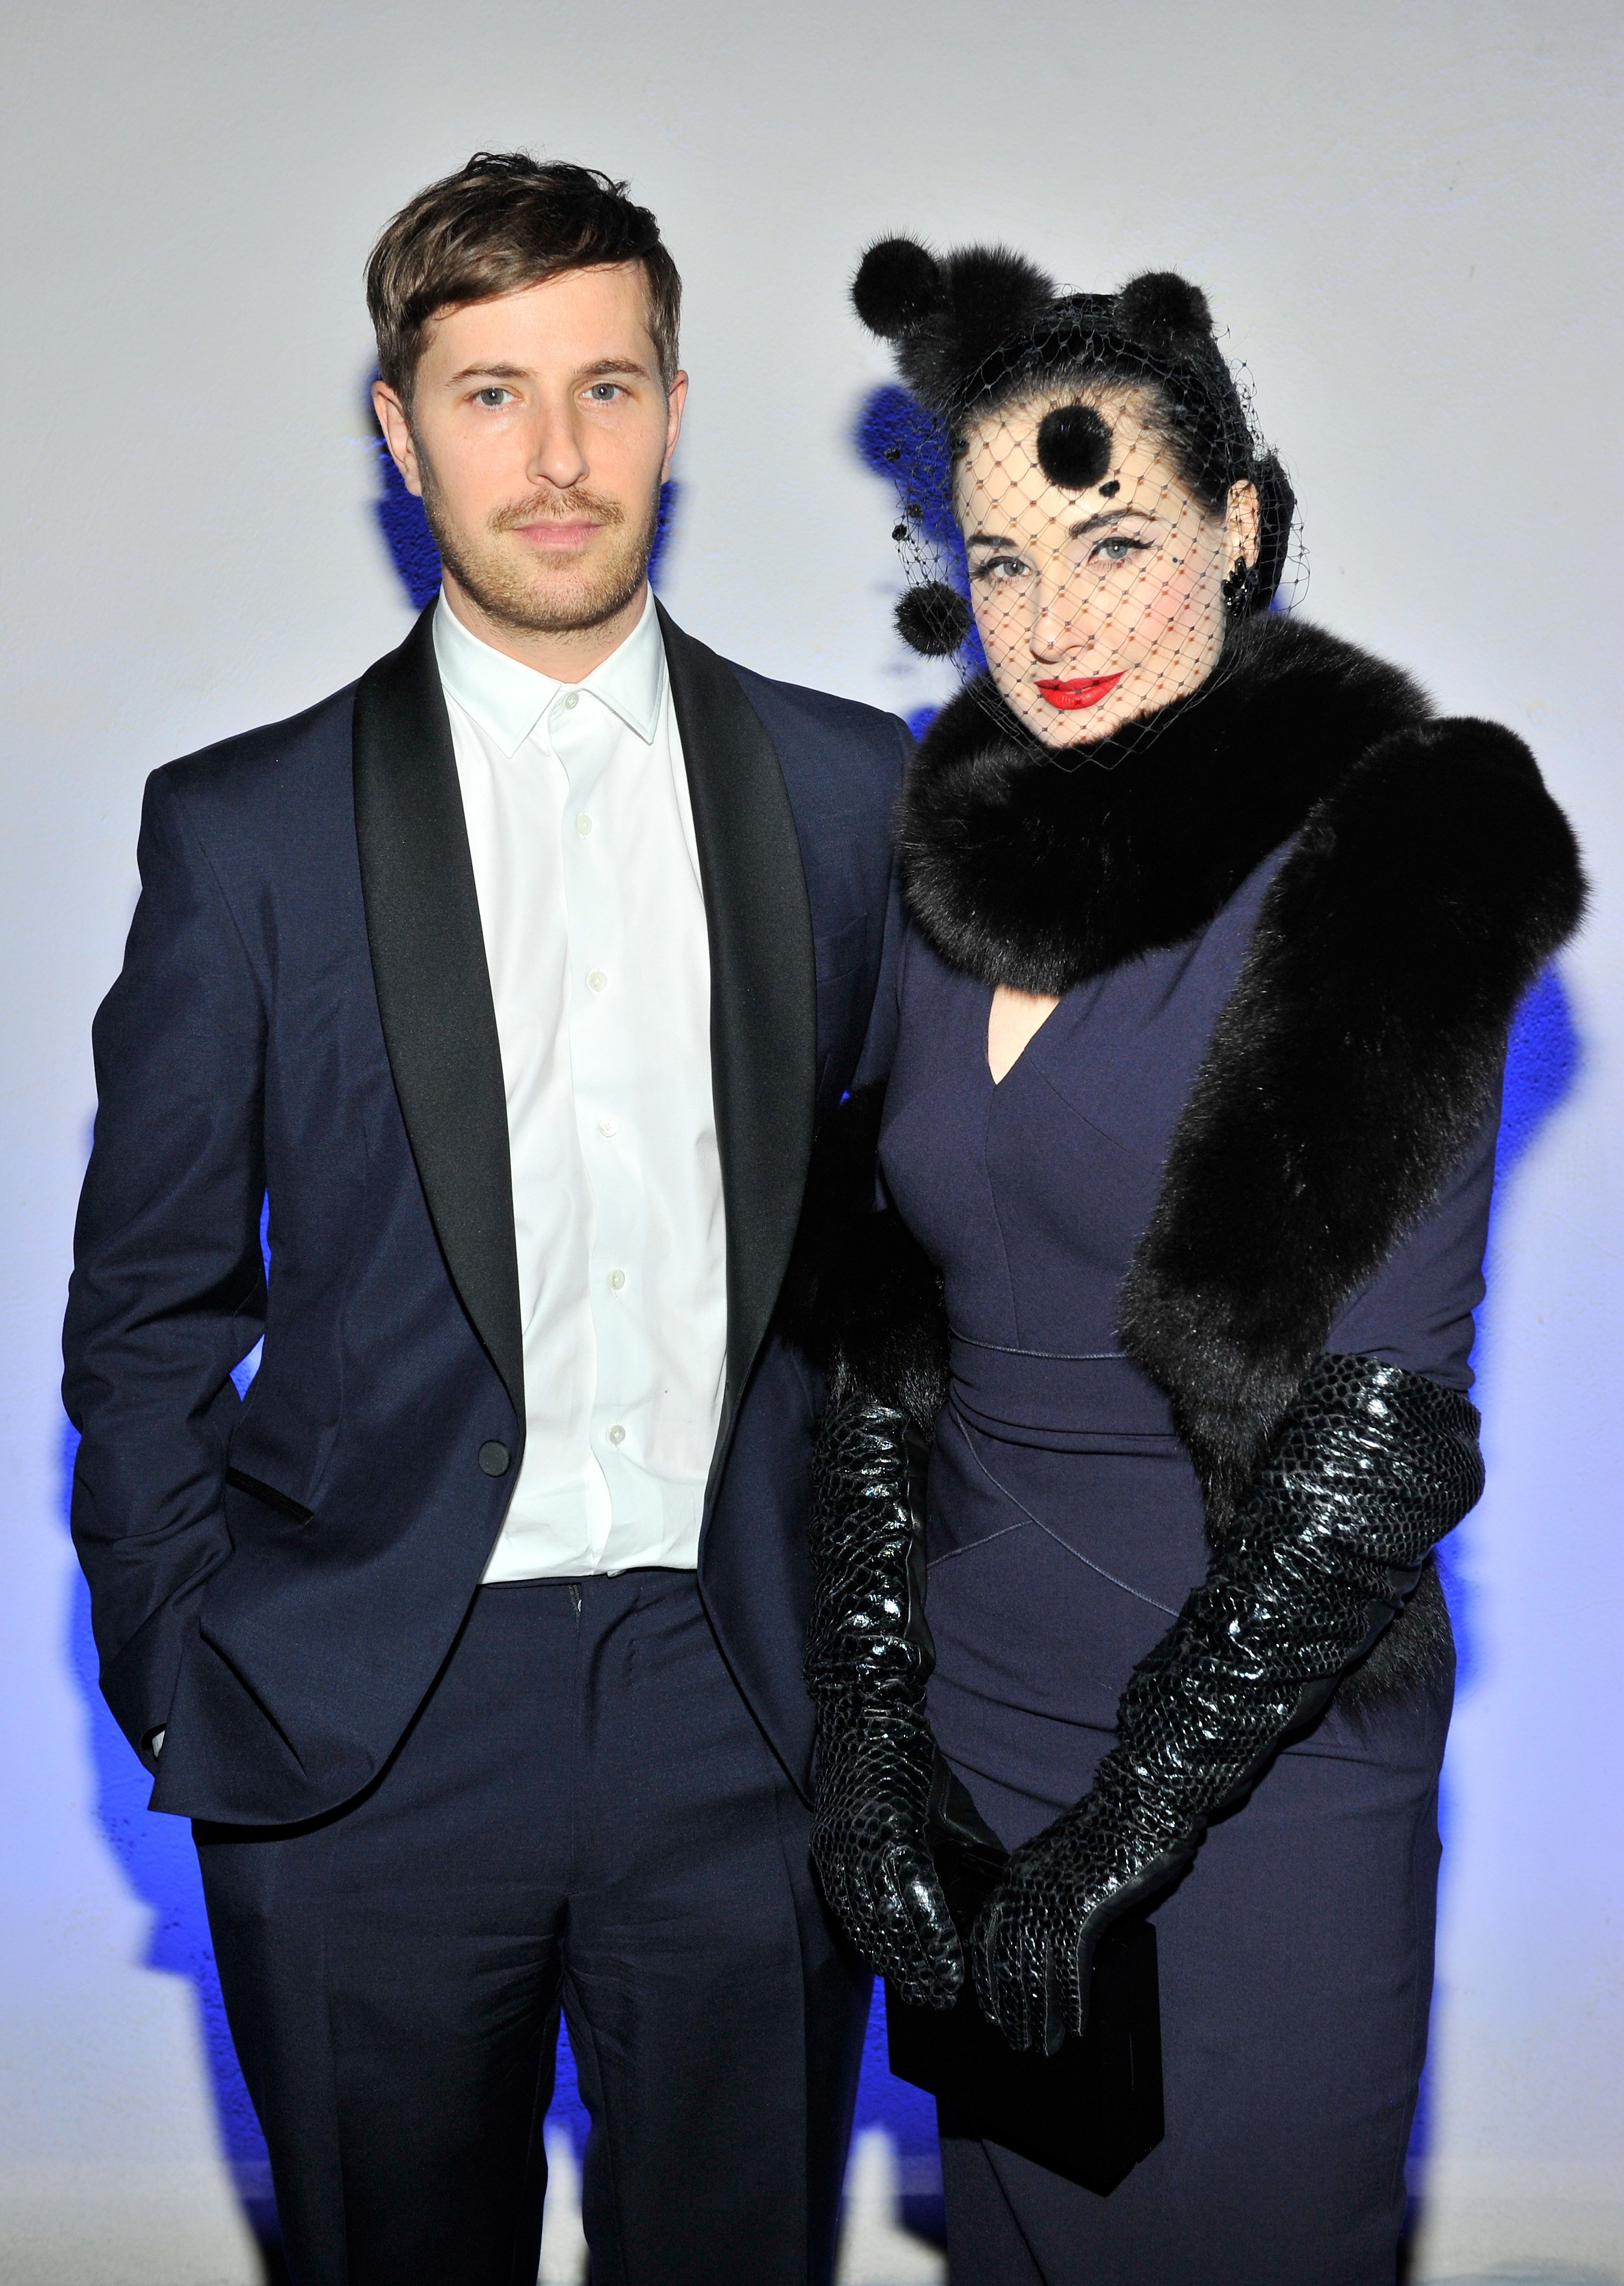 Dita Von Teese and her boyfriend Adam Rajcevich at the launch of Just One Eye's Ulysses Tier 1: The Ultimate Disaster Relief Kit on December 5, 2014 | Source: Getty Images